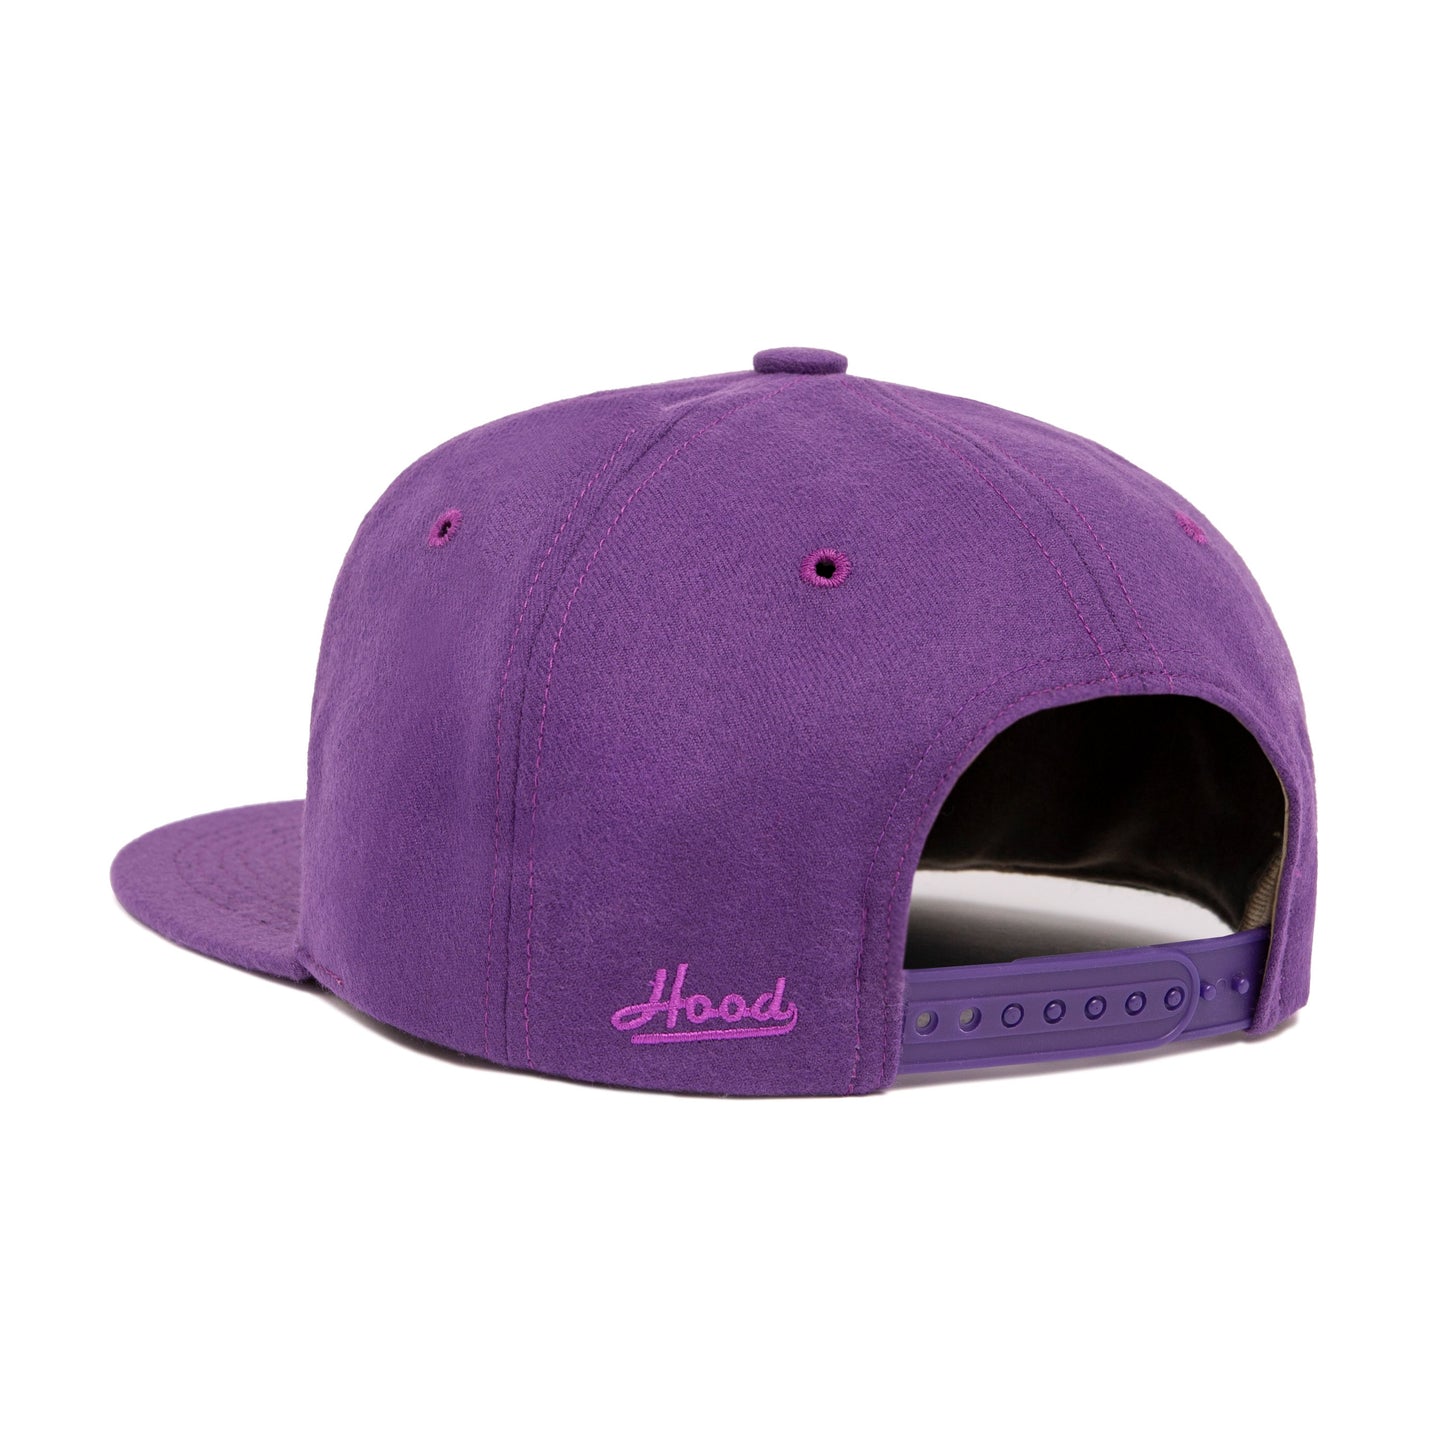 Brentwood Lakers Snapback Hat